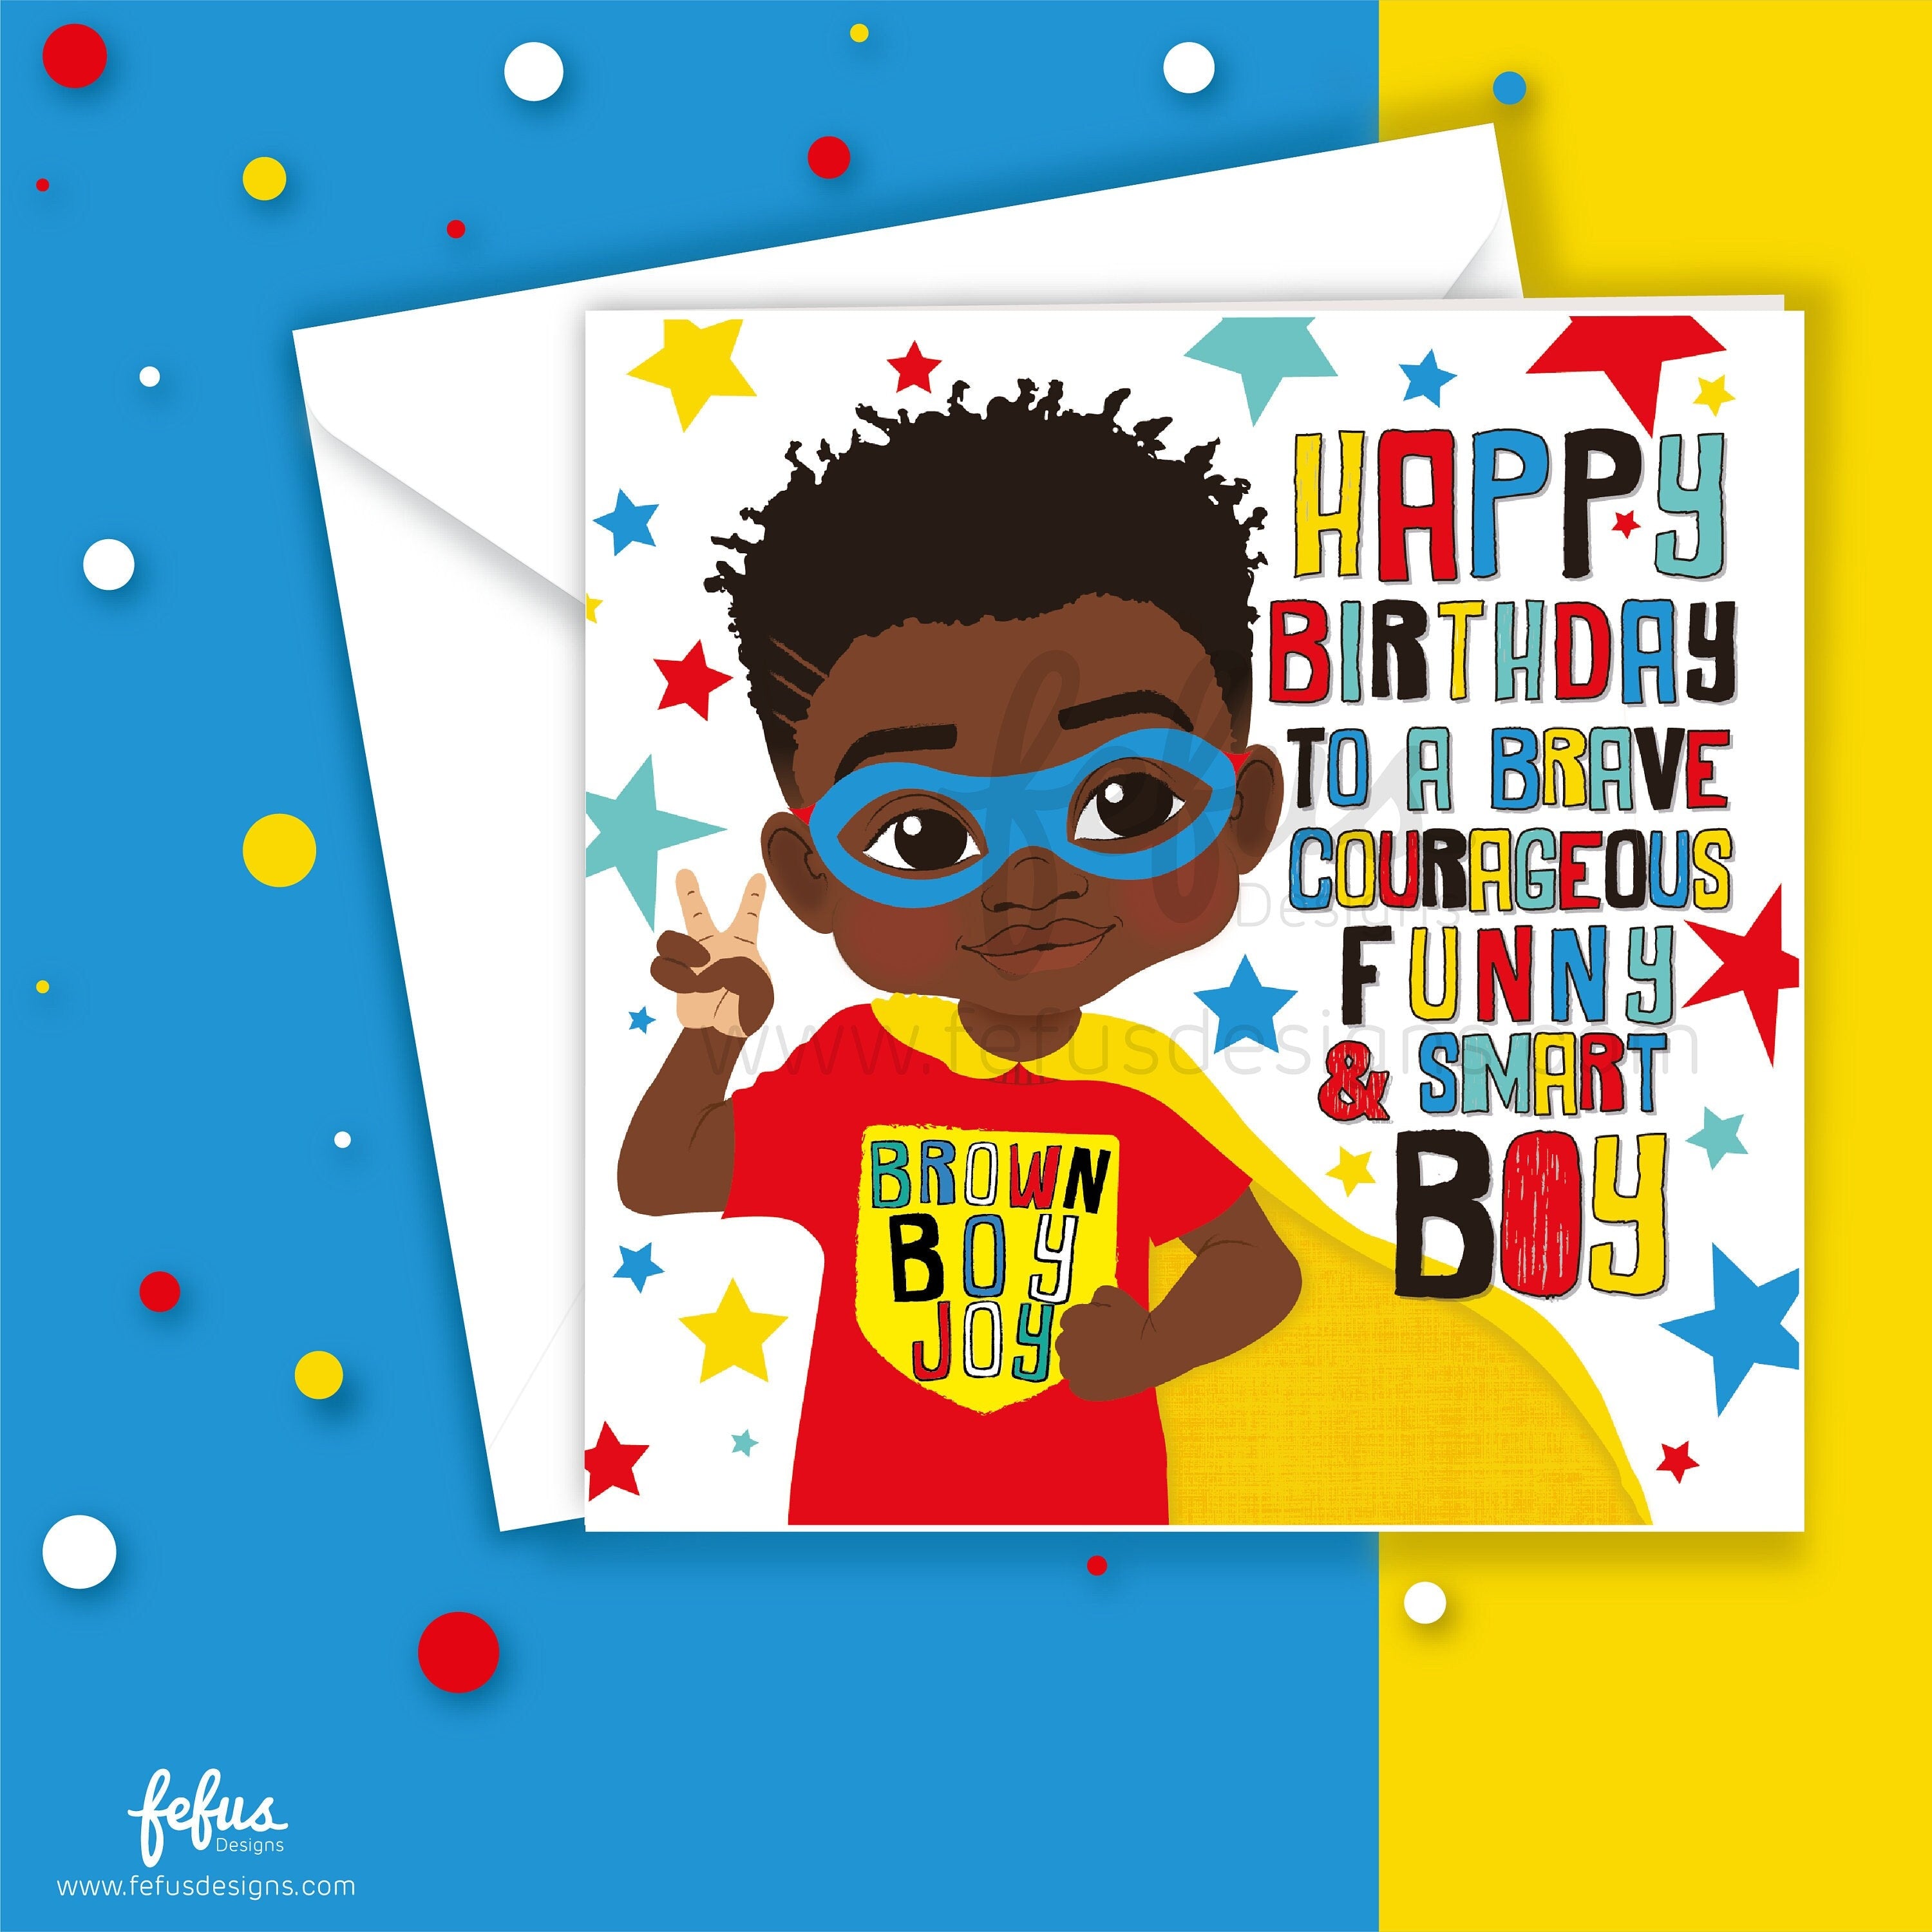 Empower your little superhero with our Black Boy Super Hero Birthday Card - Brown Boy Joy, African American Greetings | Worldwide Shipping